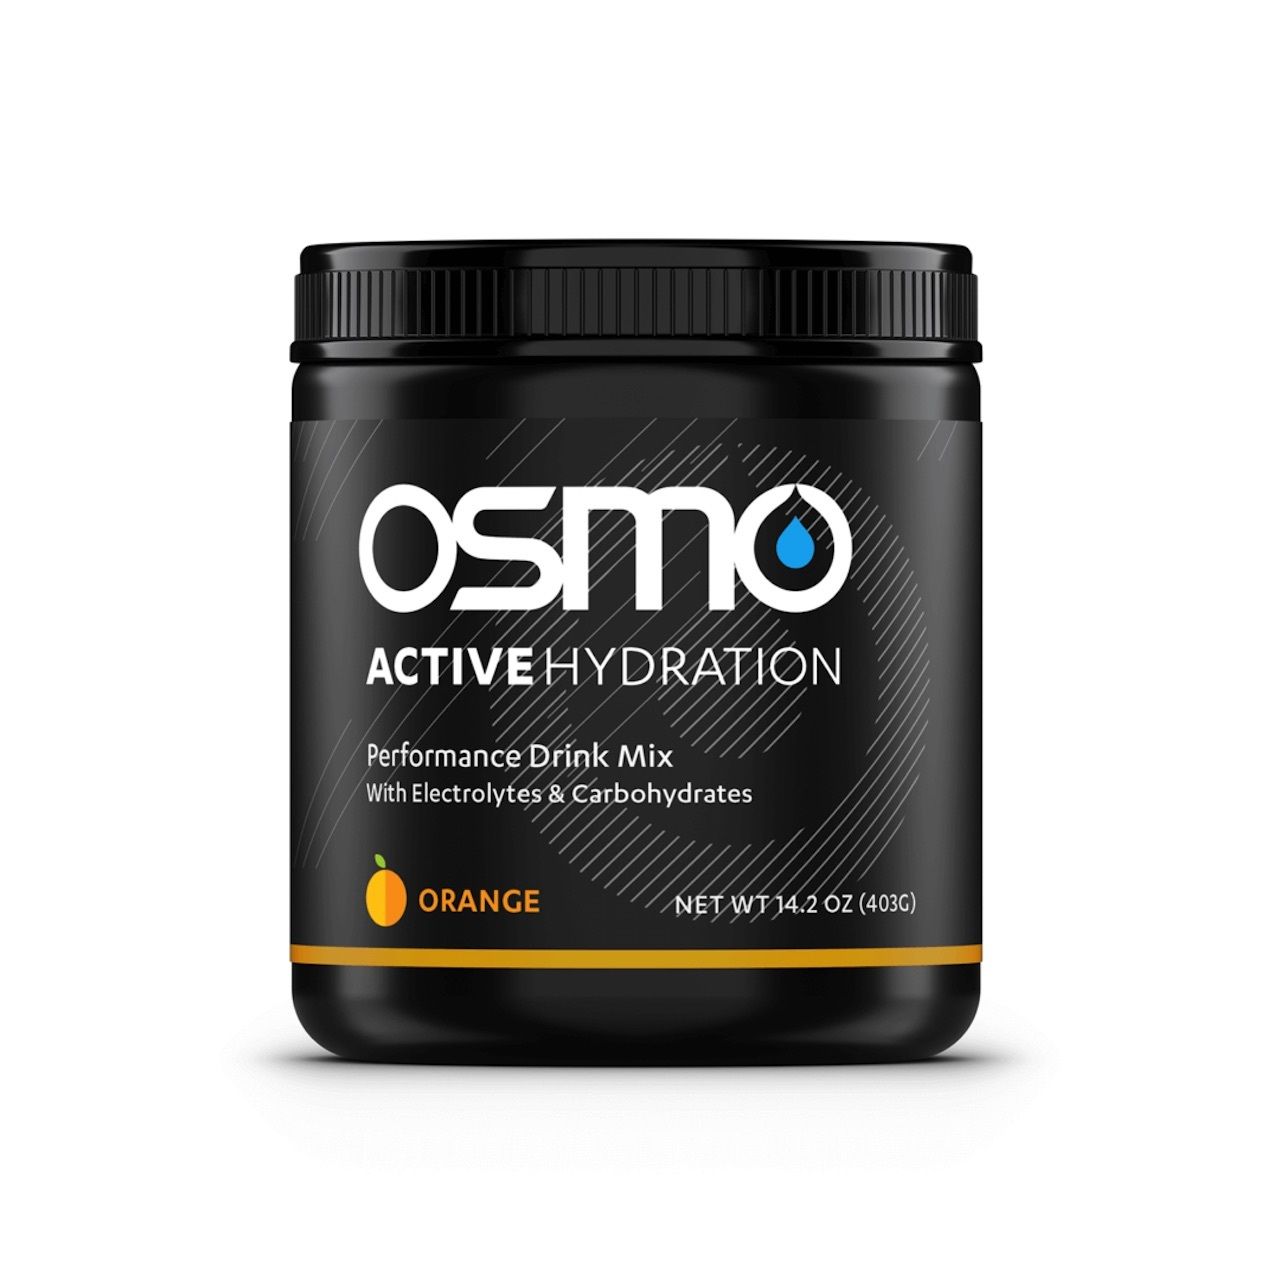 OSMO active hydration